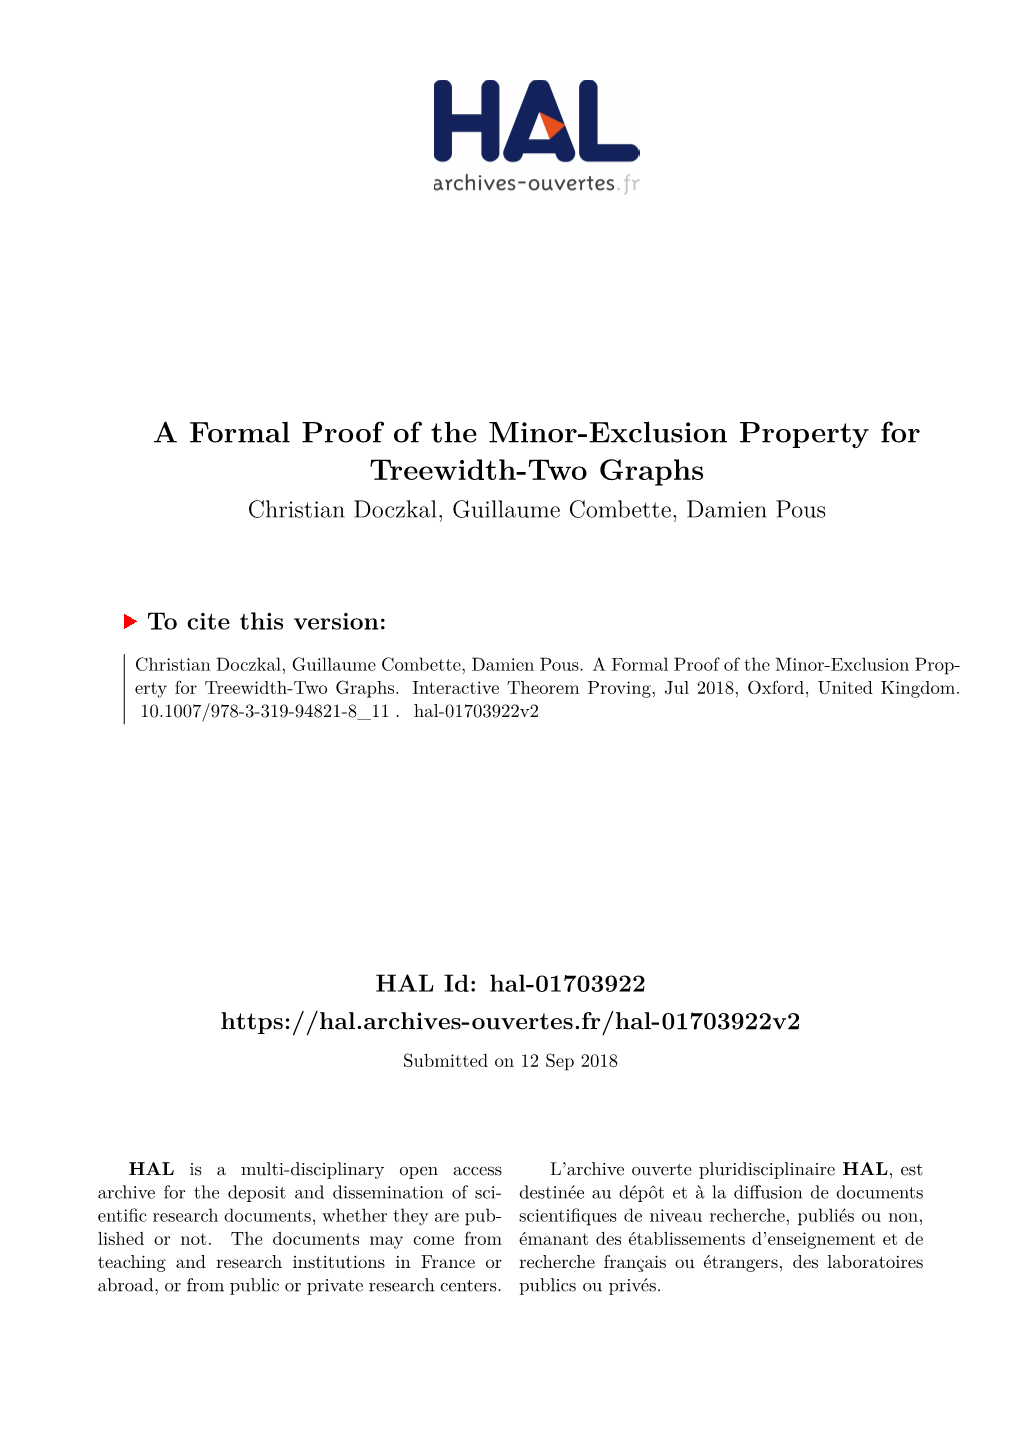 A Formal Proof of the Minor-Exclusion Property for Treewidth-Two Graphs Christian Doczkal, Guillaume Combette, Damien Pous